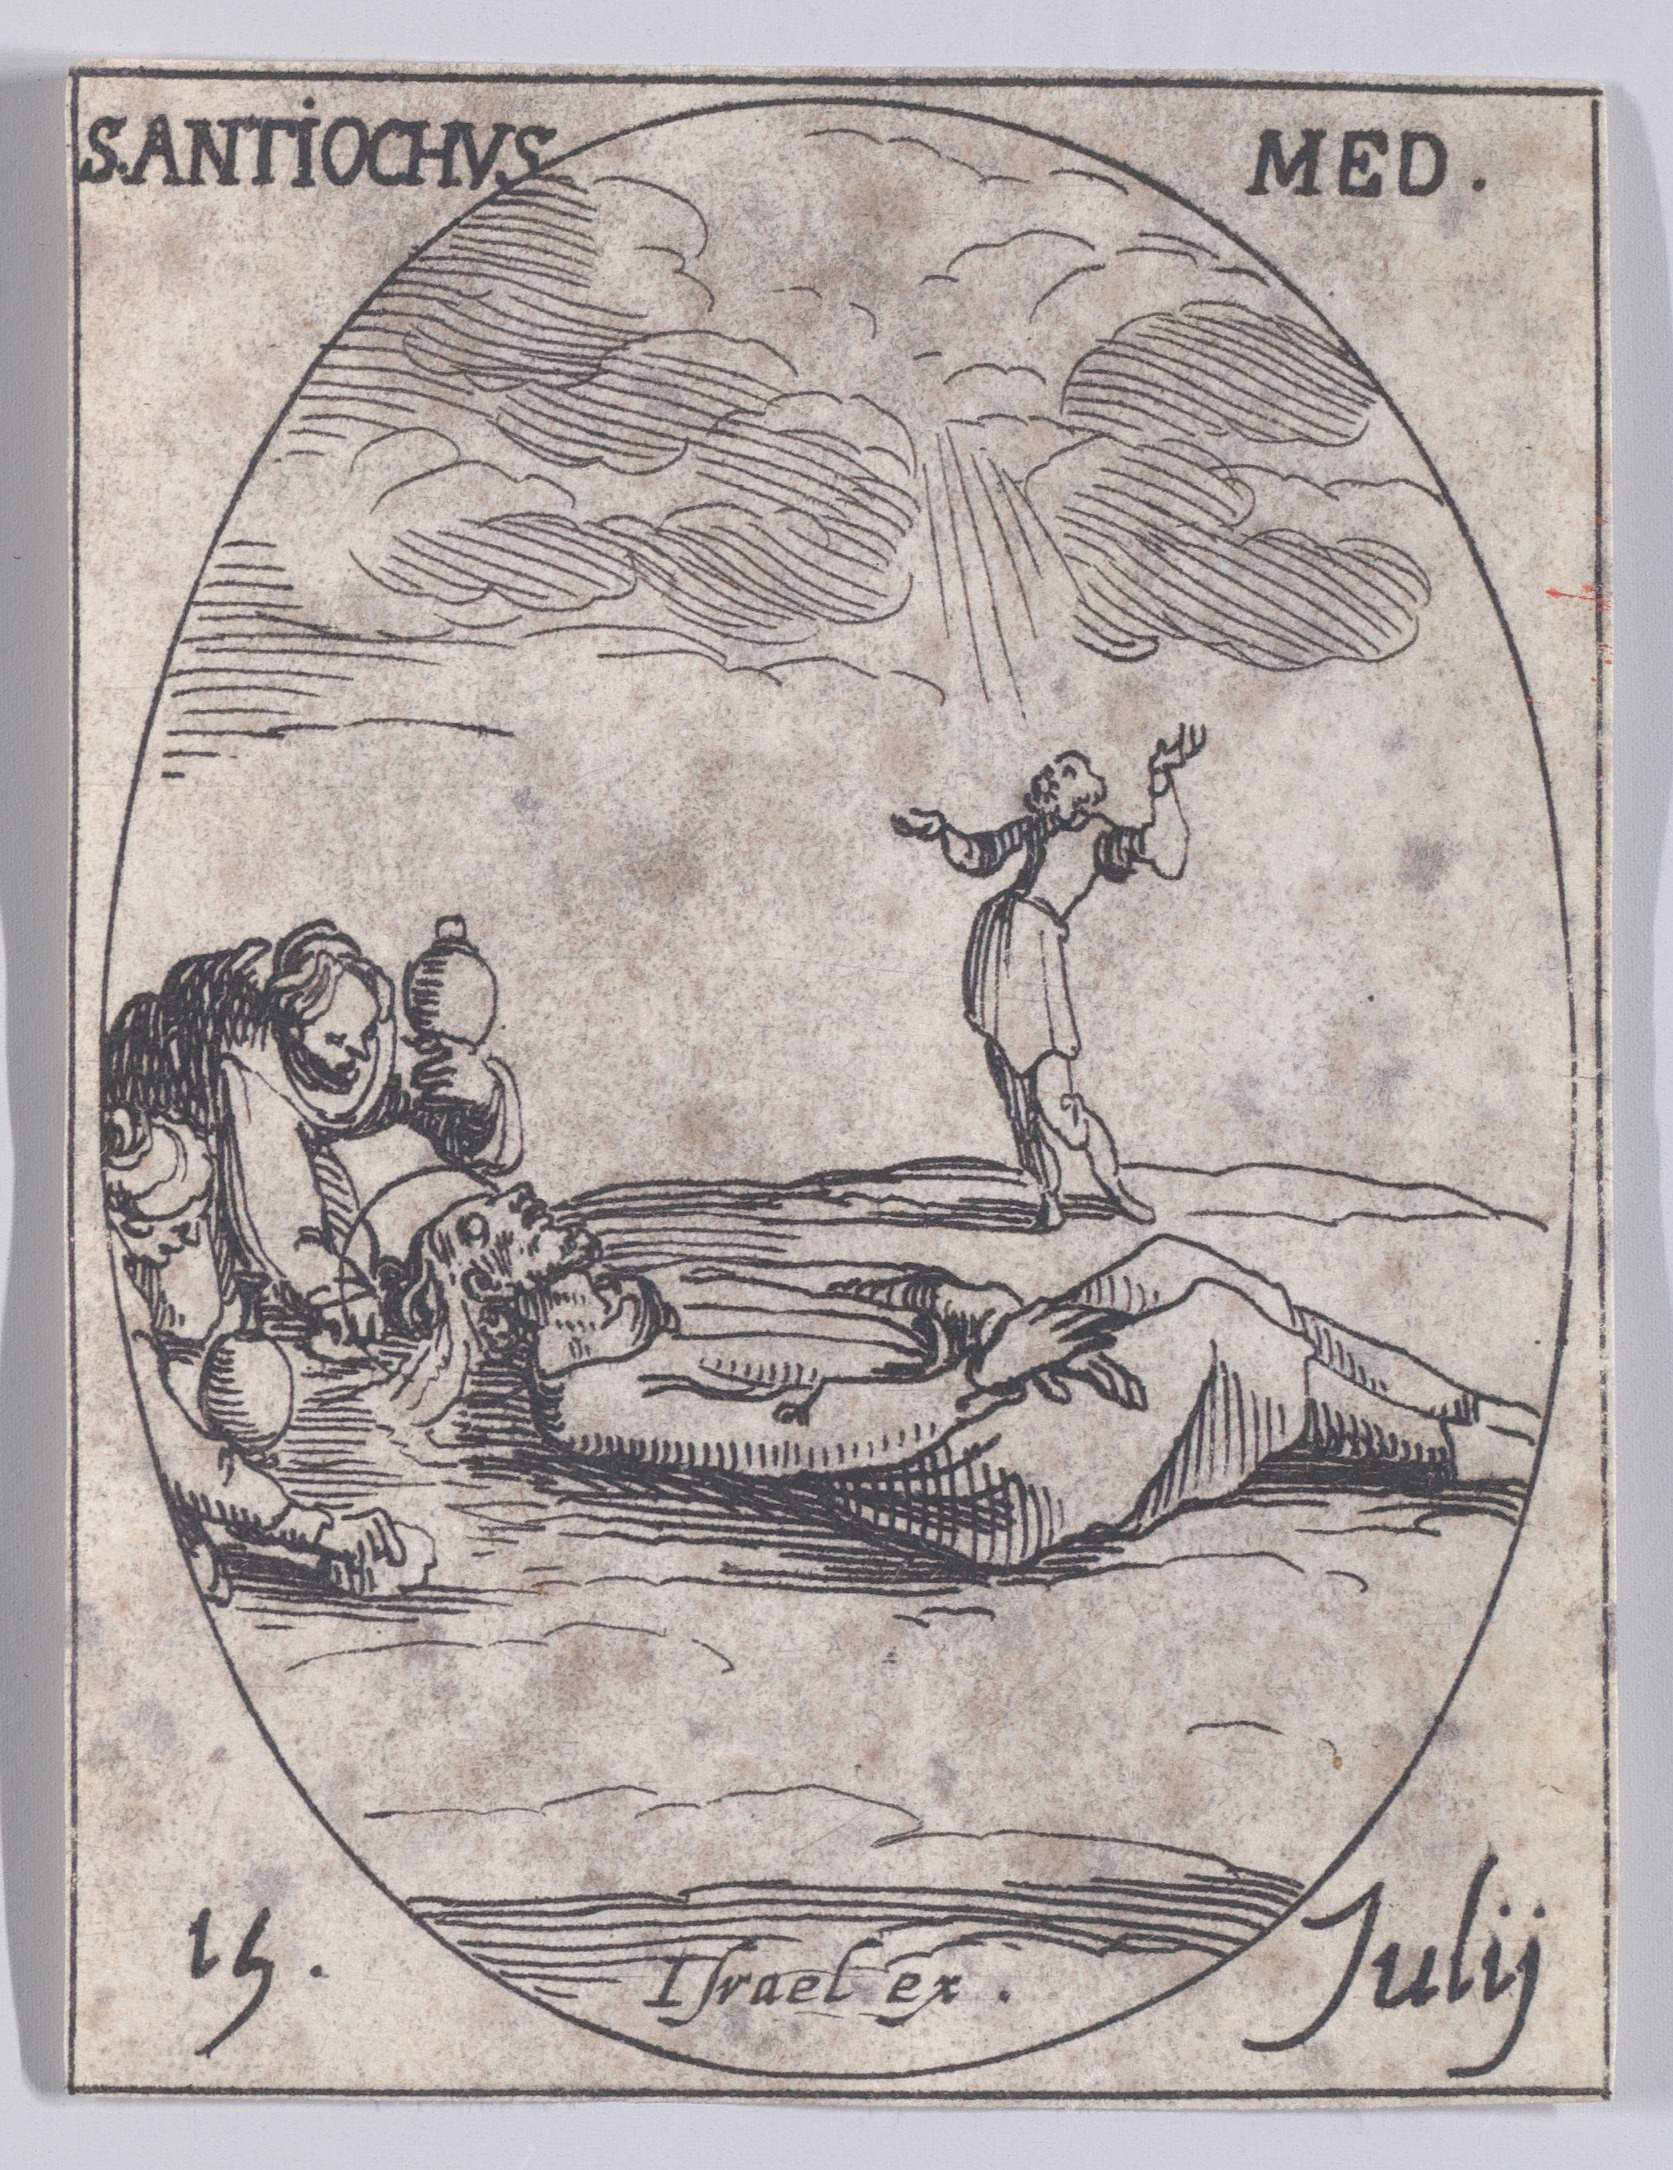 S. Antioche, médecin (St. Antiochus, Doctor), July 15th, from Les Images De Tous Les Saincts et Saintes de L'Année (Images of All of the Saints and Religious Events of the Year), Jacques Callot (French, Nancy 1592–1635 Nancy), Etching; second state of two (Lieure)